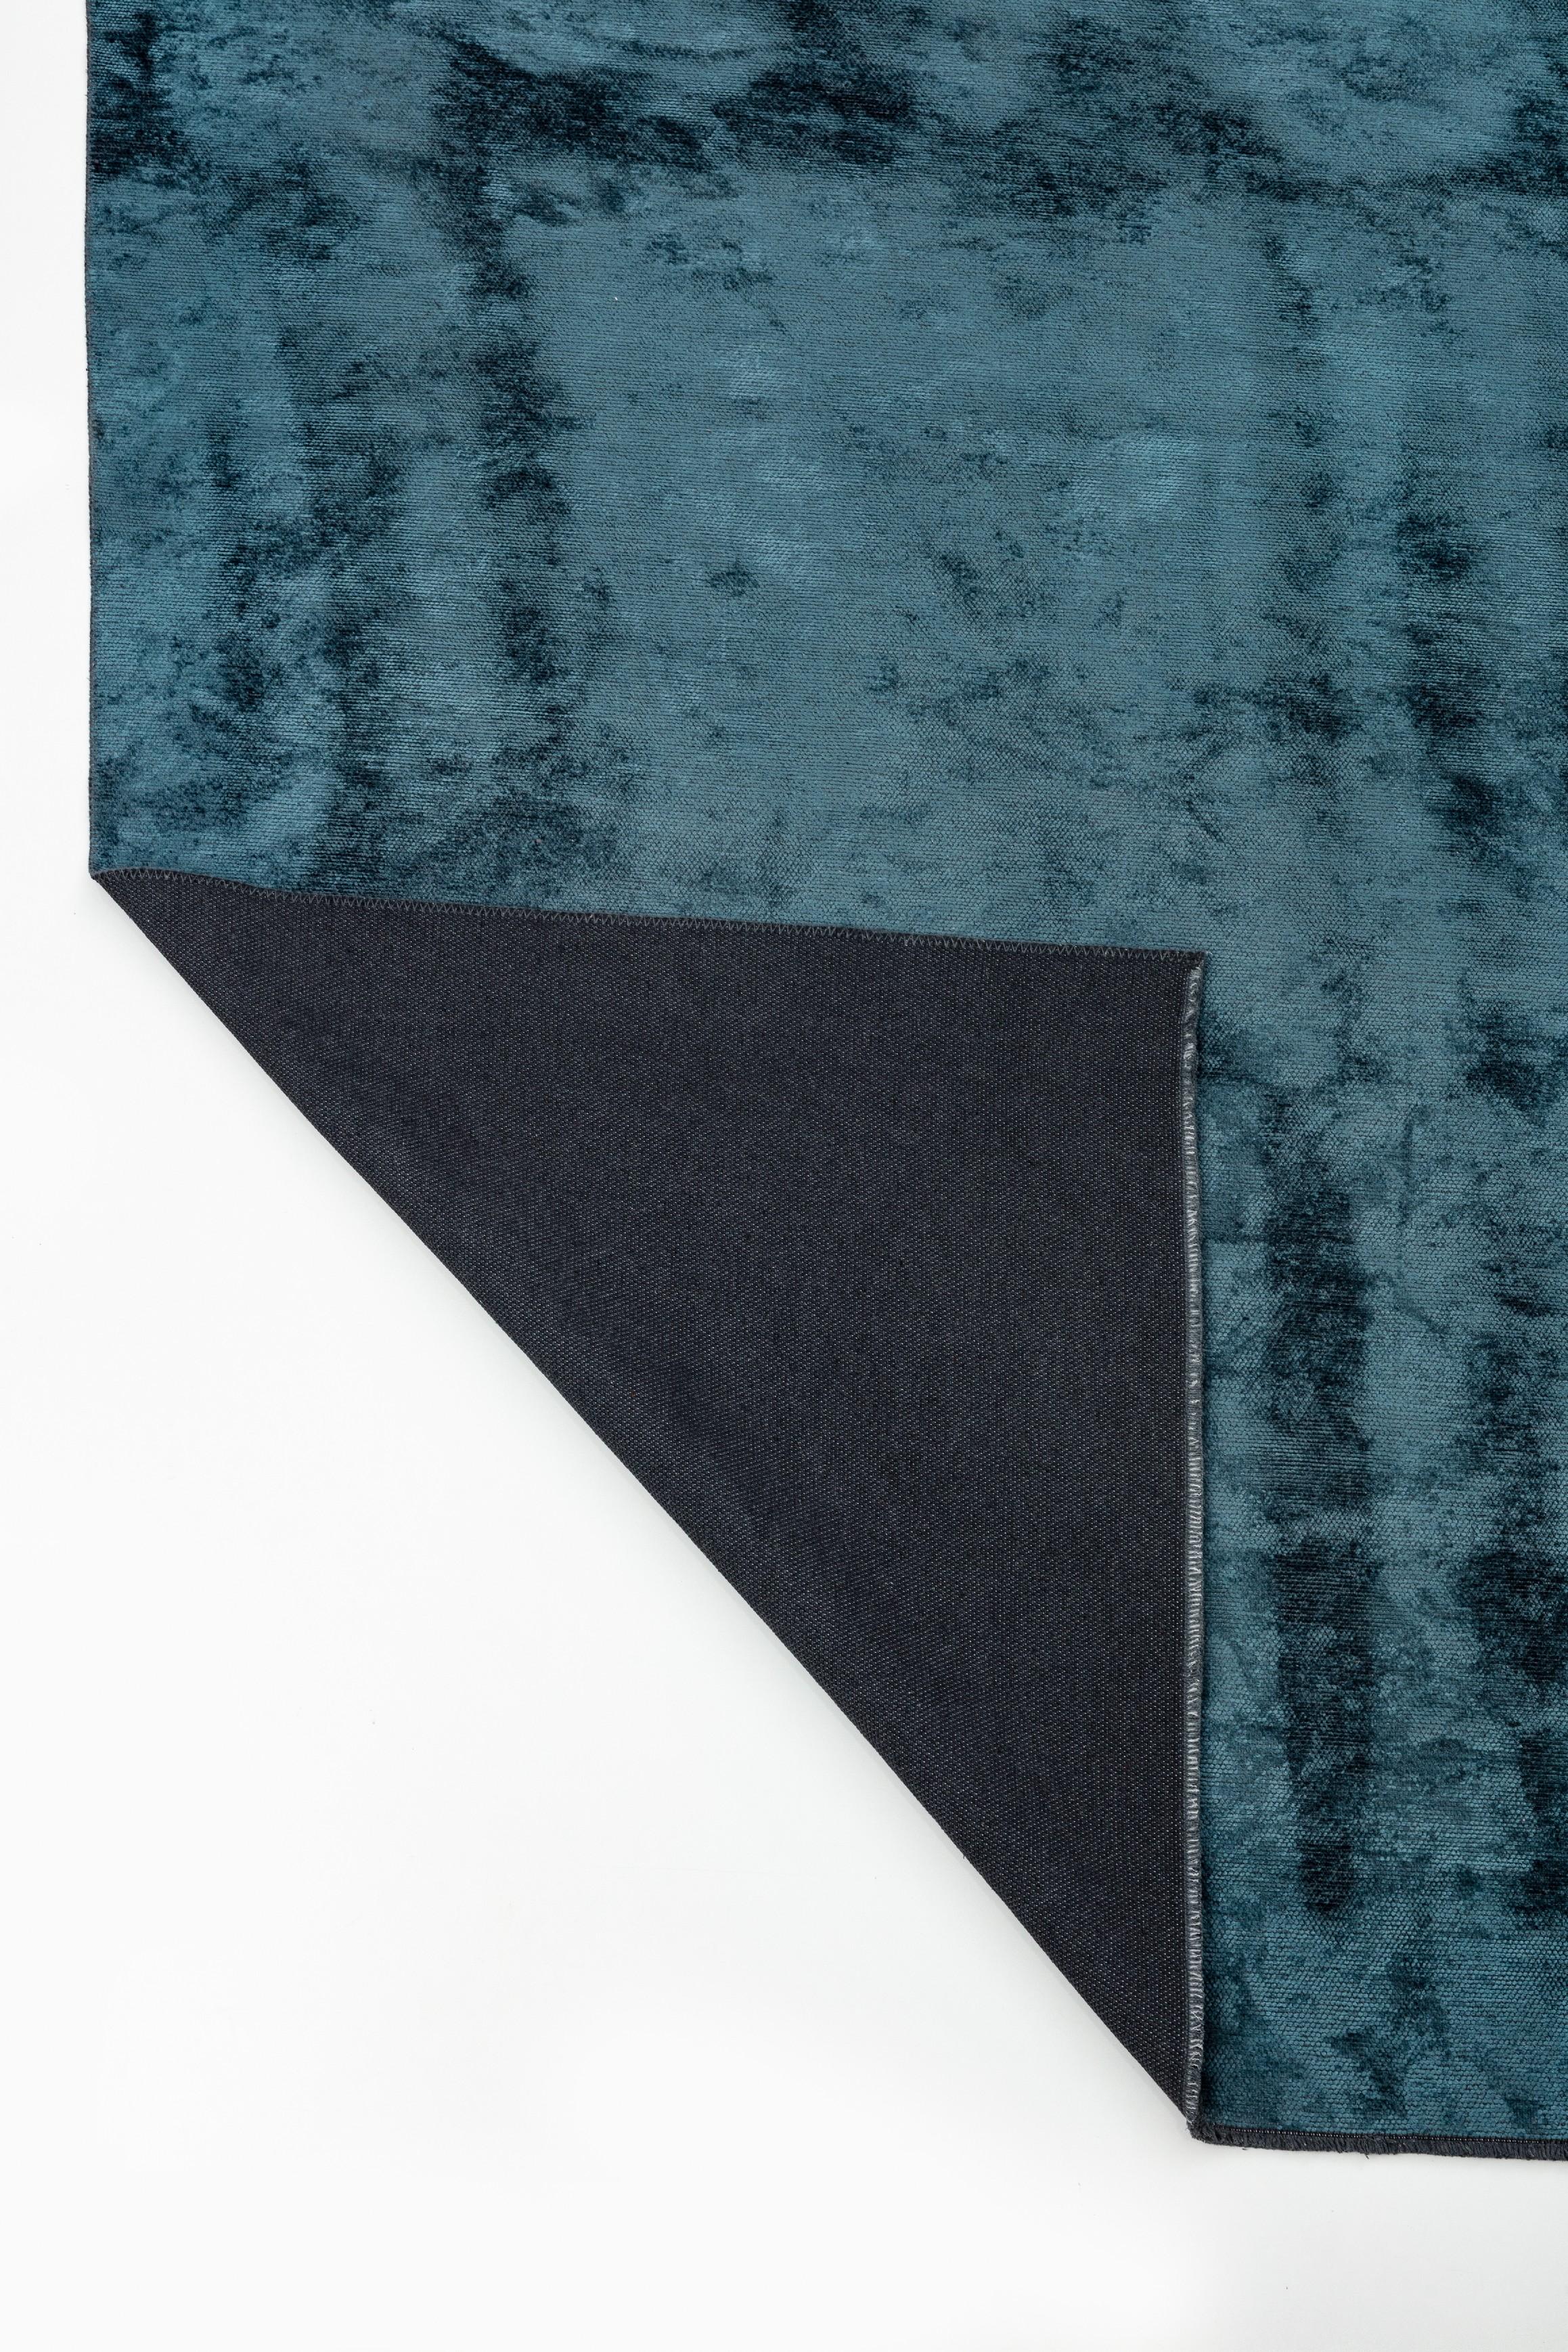 For Sale:  (Blue) Modern Solid Color Luxury Area Rug 3